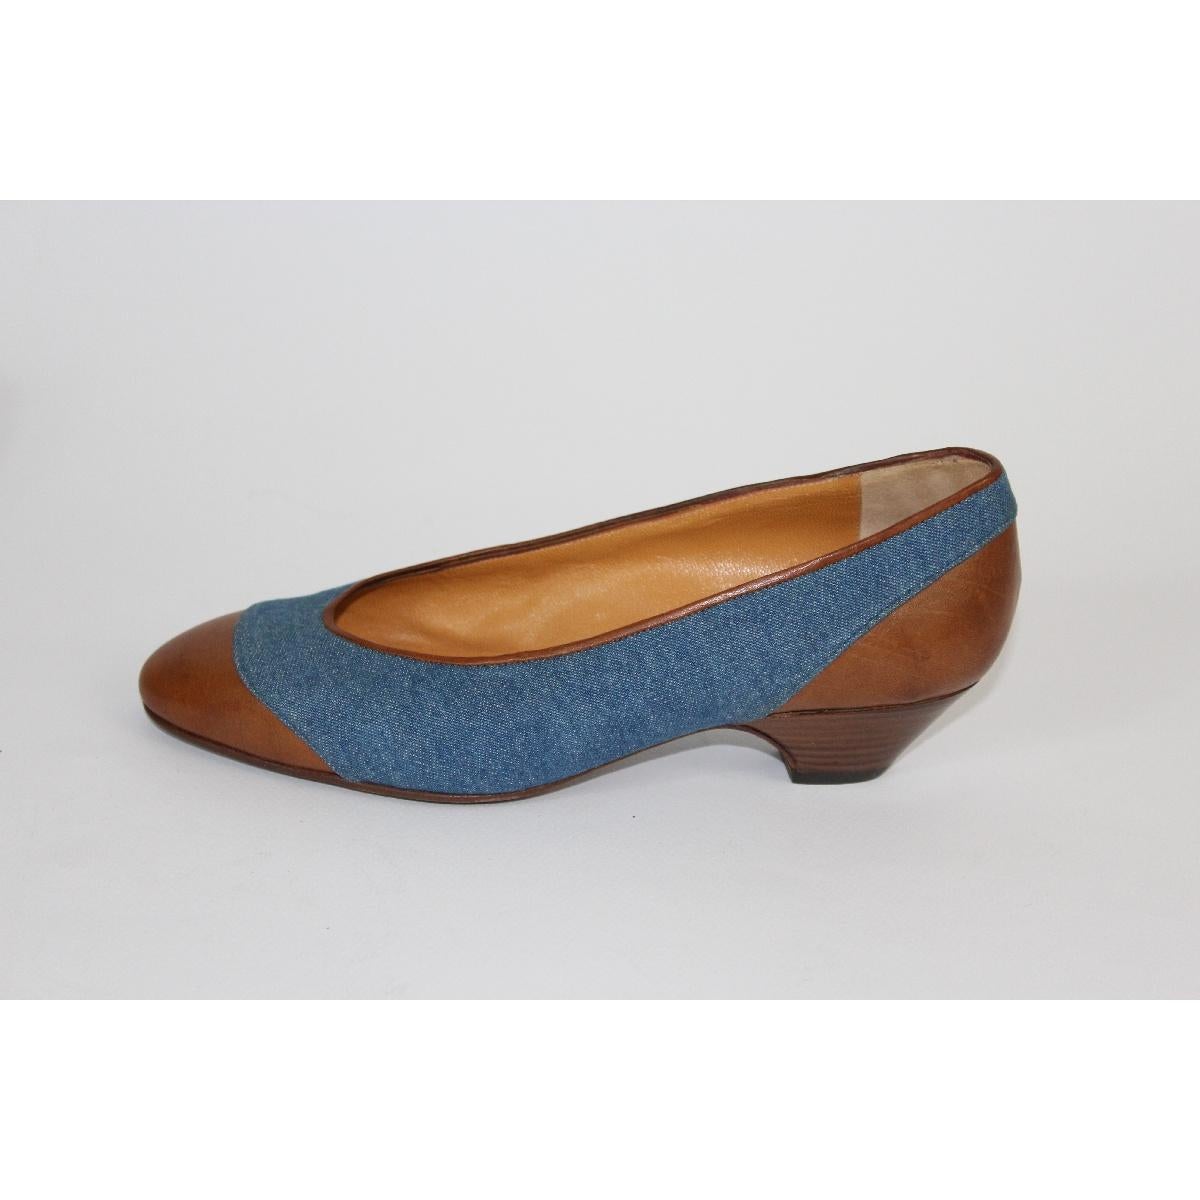 Arfango Blue Brown Leather Jeans Heel Shoes In New Condition For Sale In Brindisi, Bt